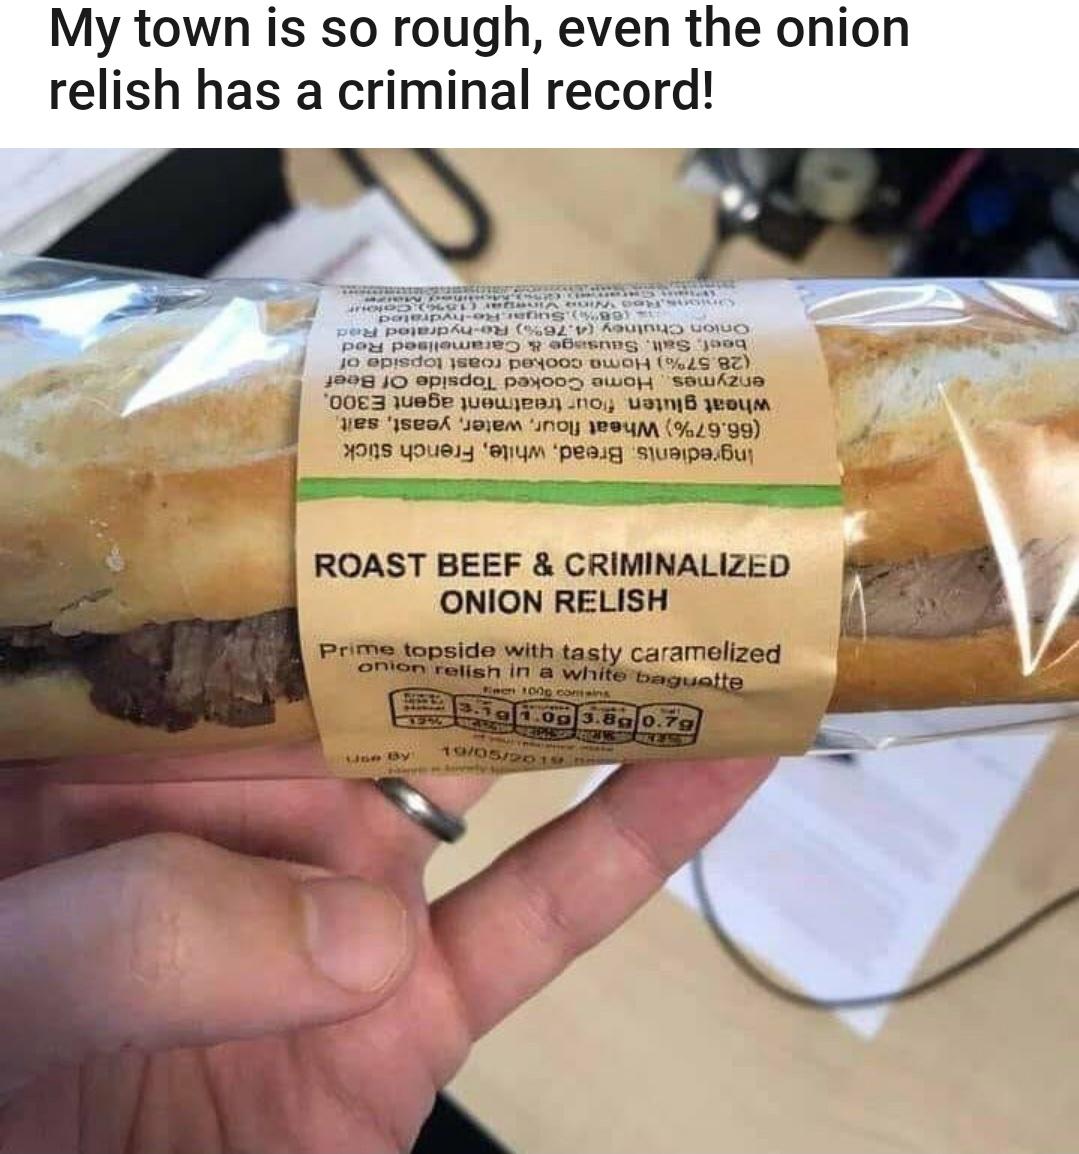 19052015 By 1207 og 3.89 0.79 Den 1000 comens onion relish in a white baguette Prime topside with tasty caramelized Onion Relish Roast Beef & Criminalized Ingredients Bread, white, French stick 66.67% Wheat flour, water, yeast, salt wheat gluten fou…